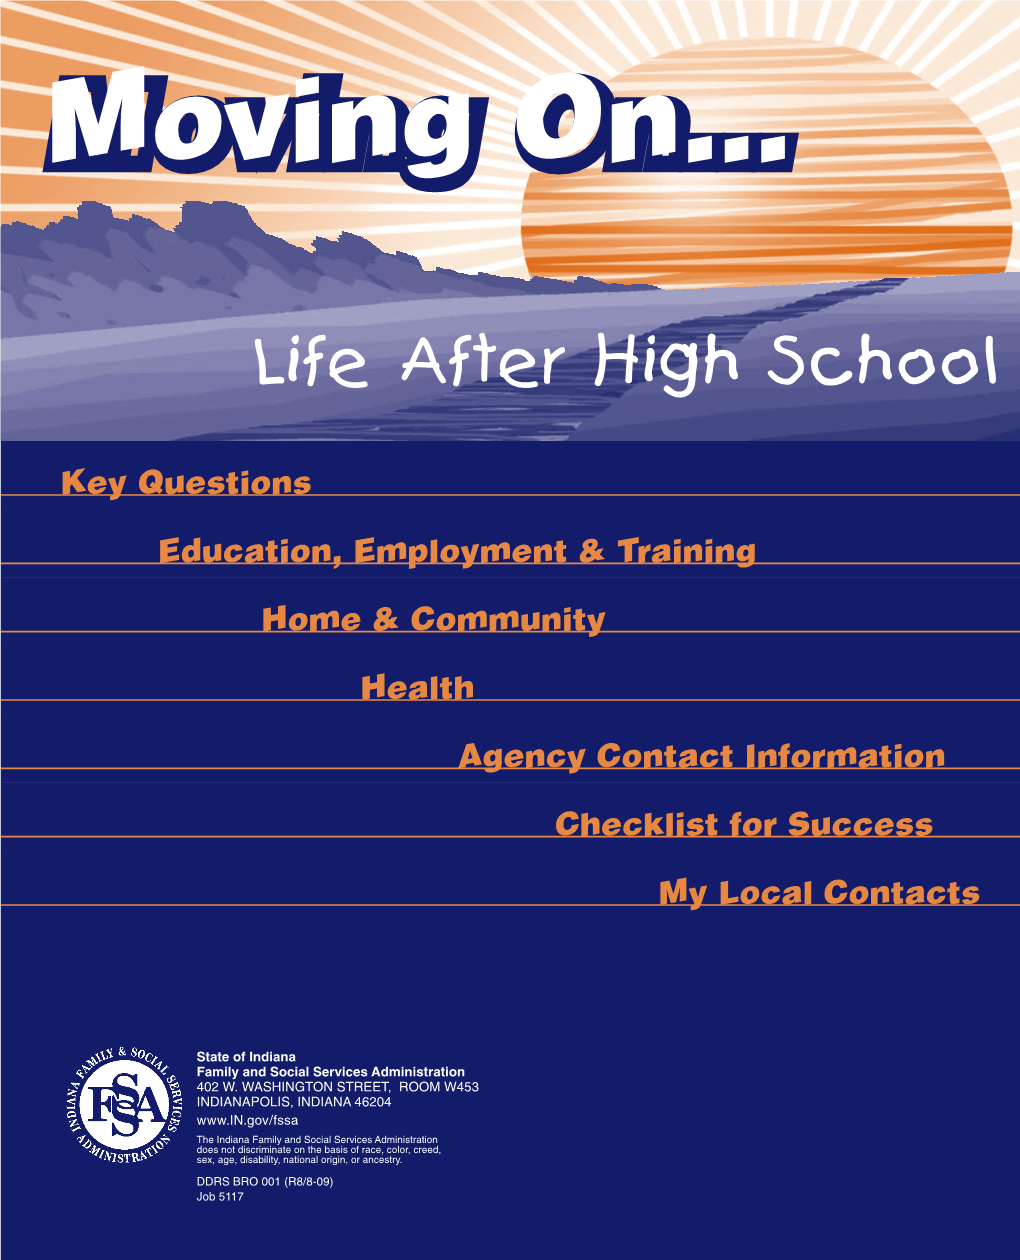 Moving On...Life After High School